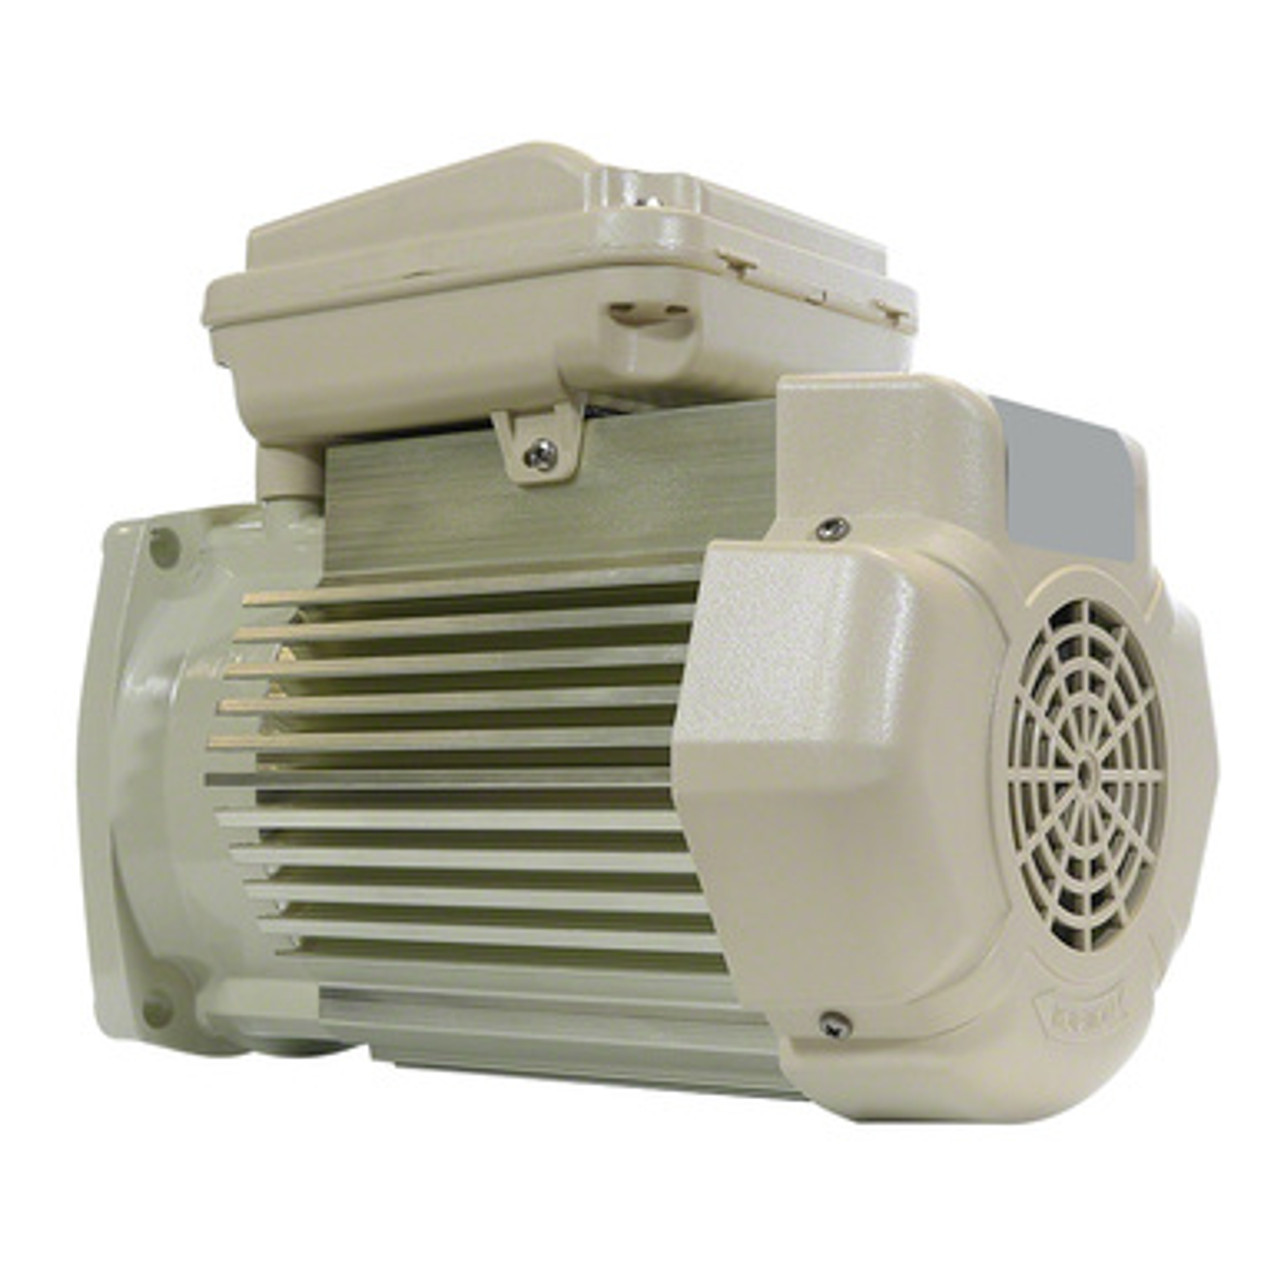 Pentair, Pump Motor, Horsepower: 1.5, For Use With:Whisperflo Pumps/Superflo Pumps